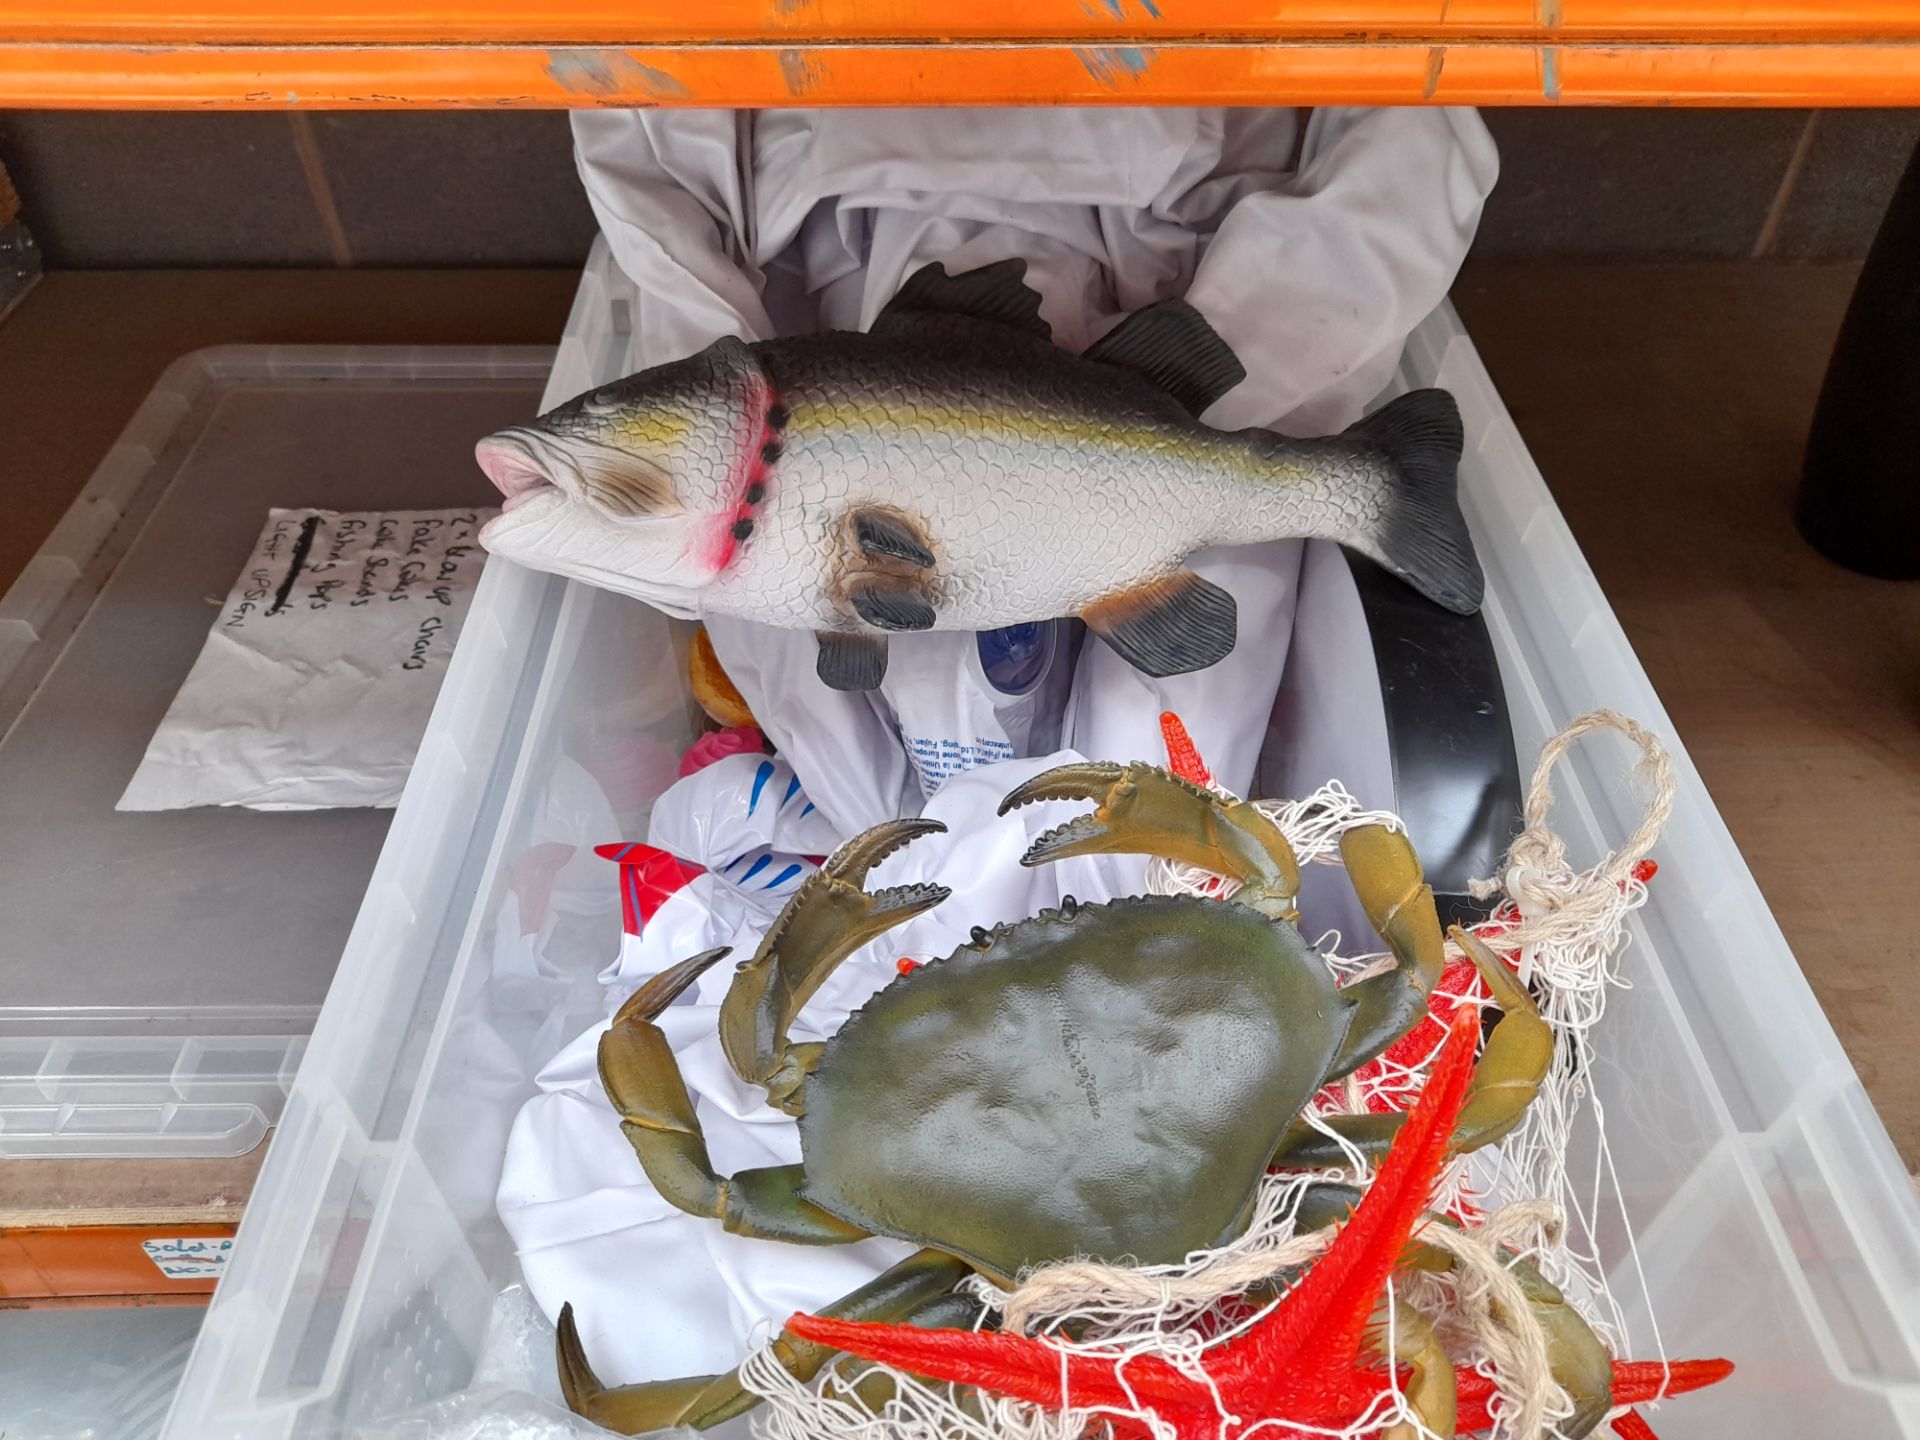 Plastic Crate containing various Staging Props, including fake cakes, fish, etc - Image 2 of 3